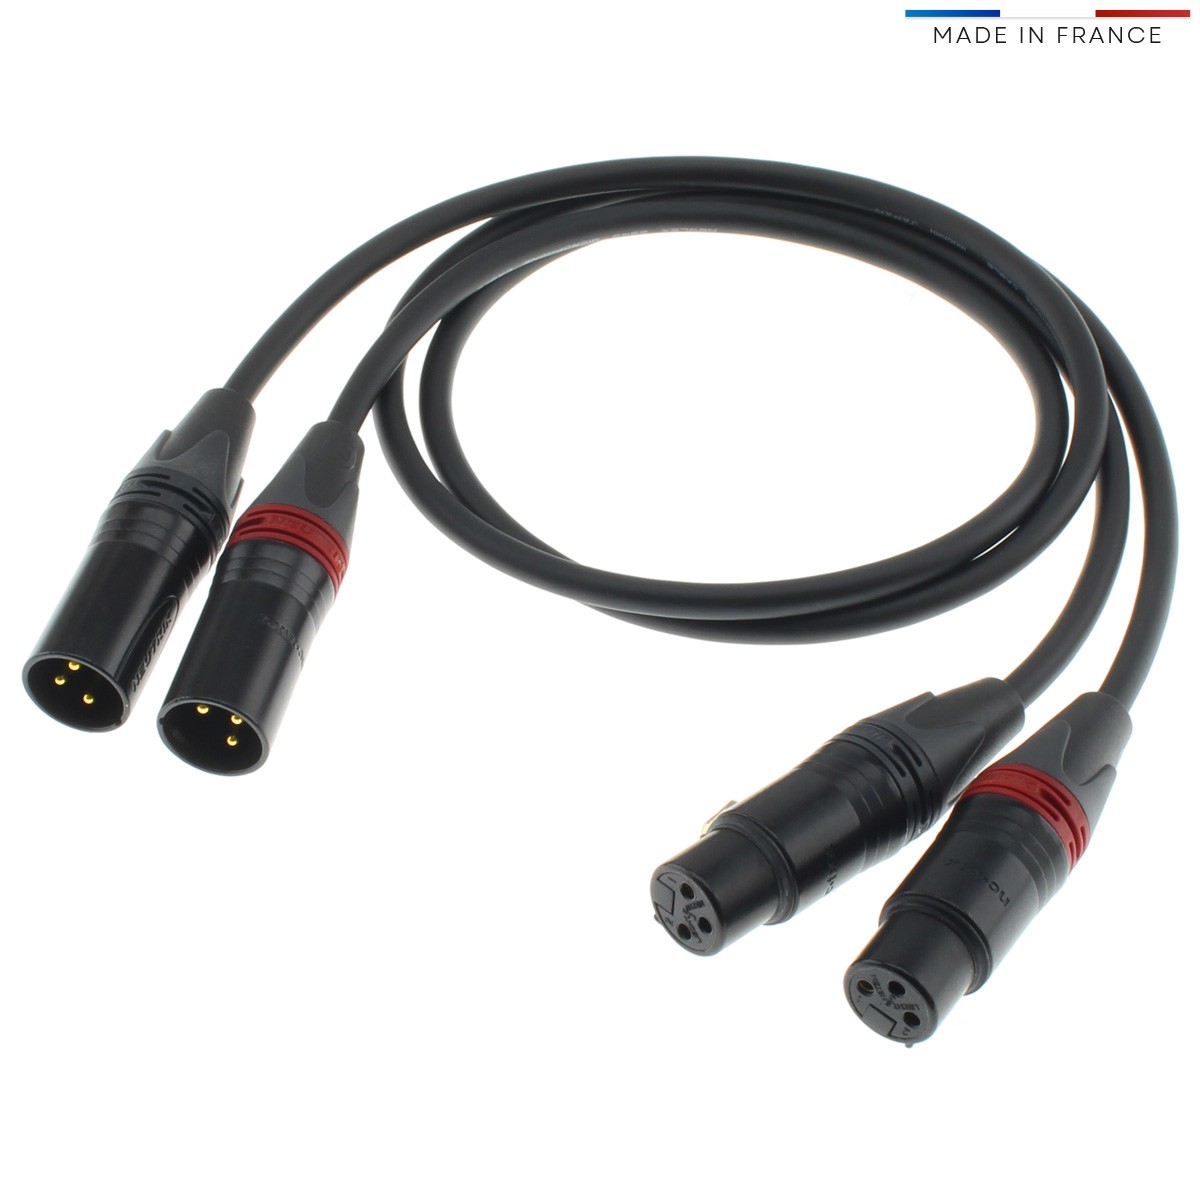 AUDIOPHONICS WIRE Interconnect Cable Stereo XLR OFC Copper Gold Plated 75cm (Pair)